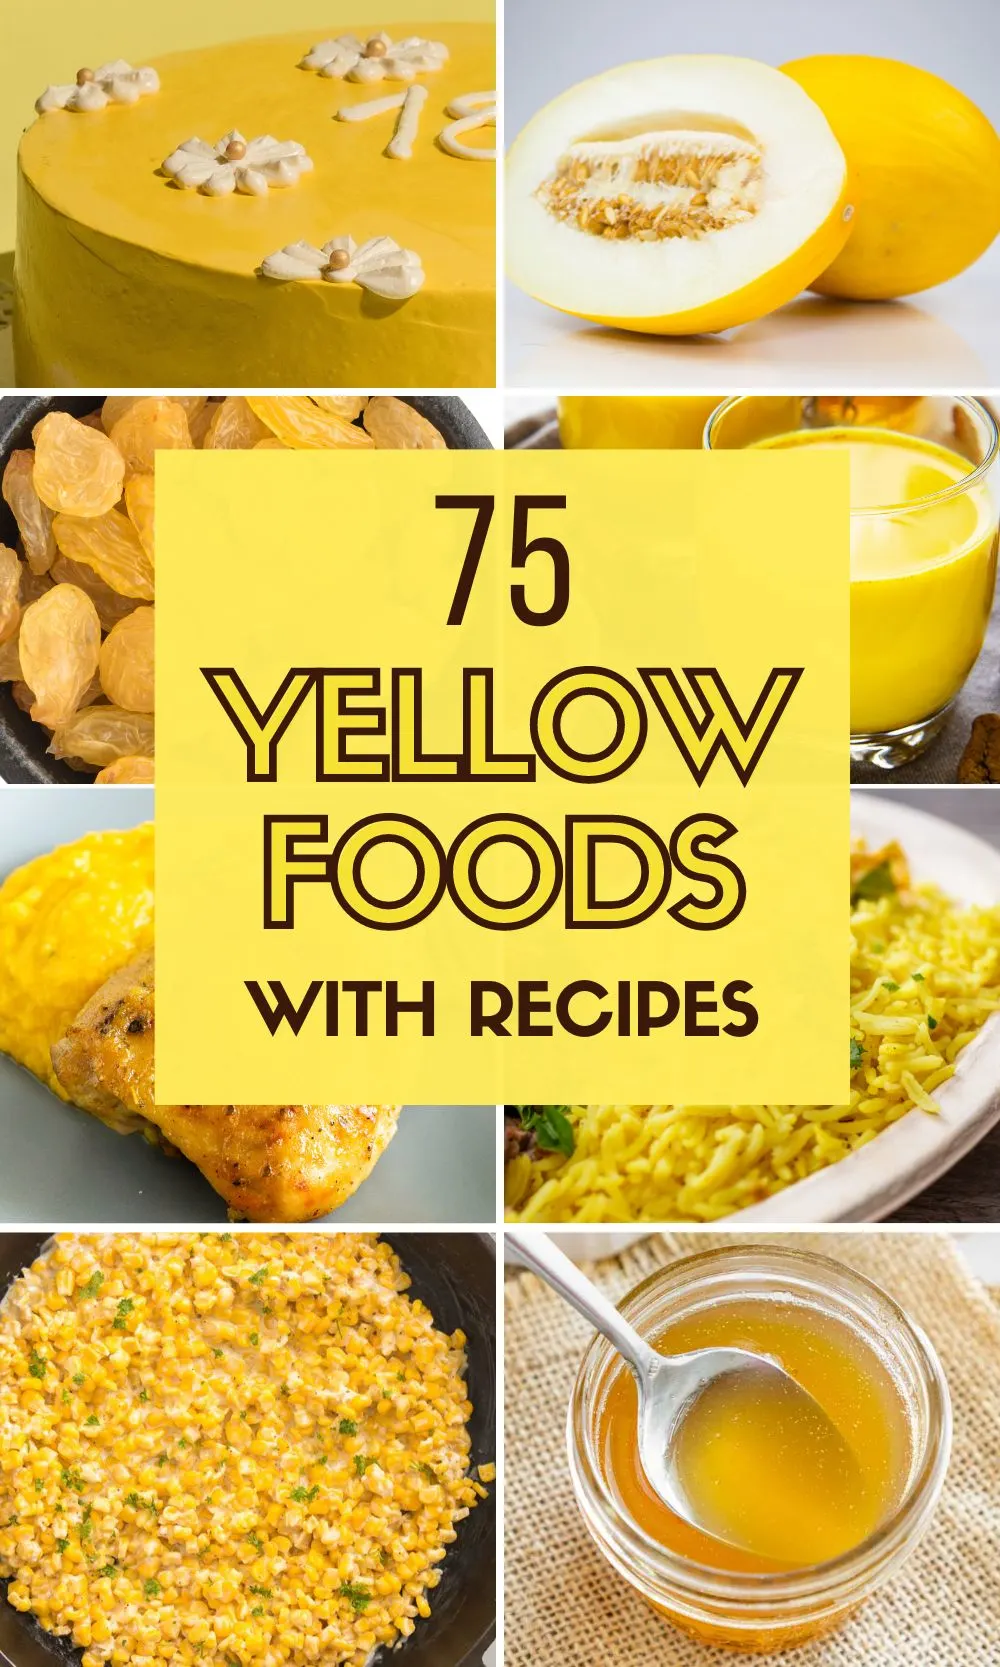 Pinterest image with text: 75 yellow foods with recipes